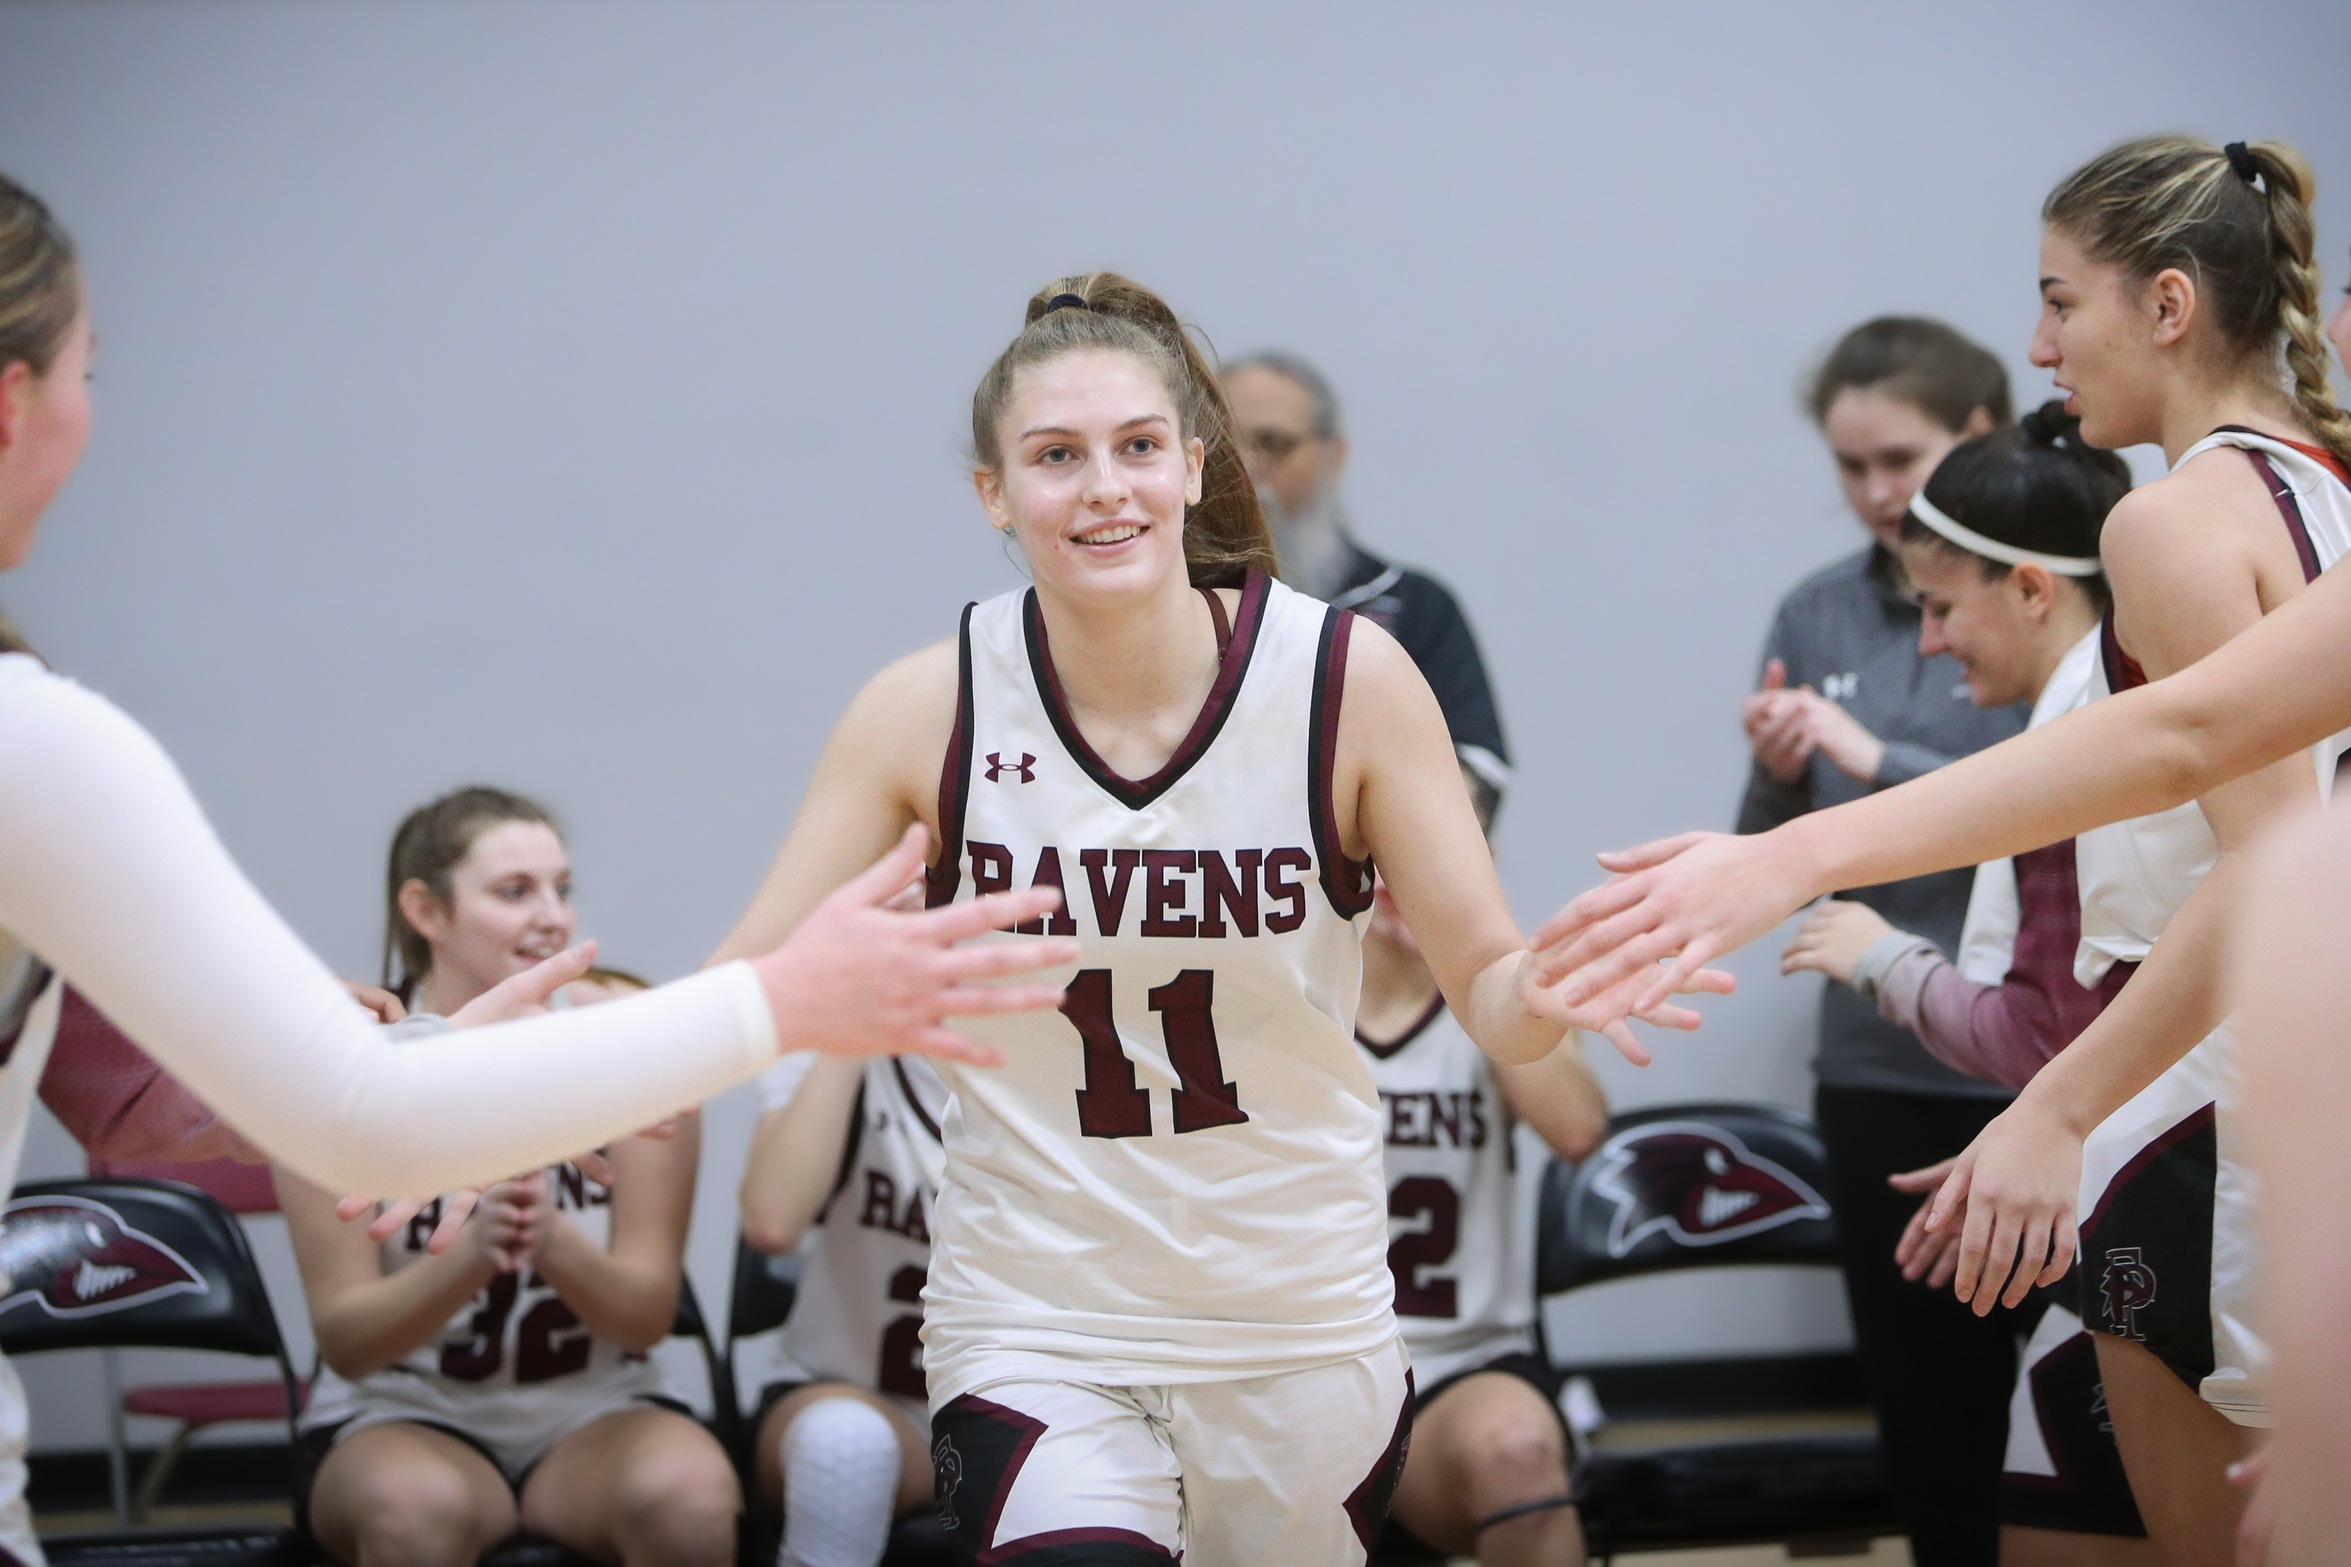 Women's Basketball Upsets No.5 New Haven in First Round of NE10 Championship, 57-49